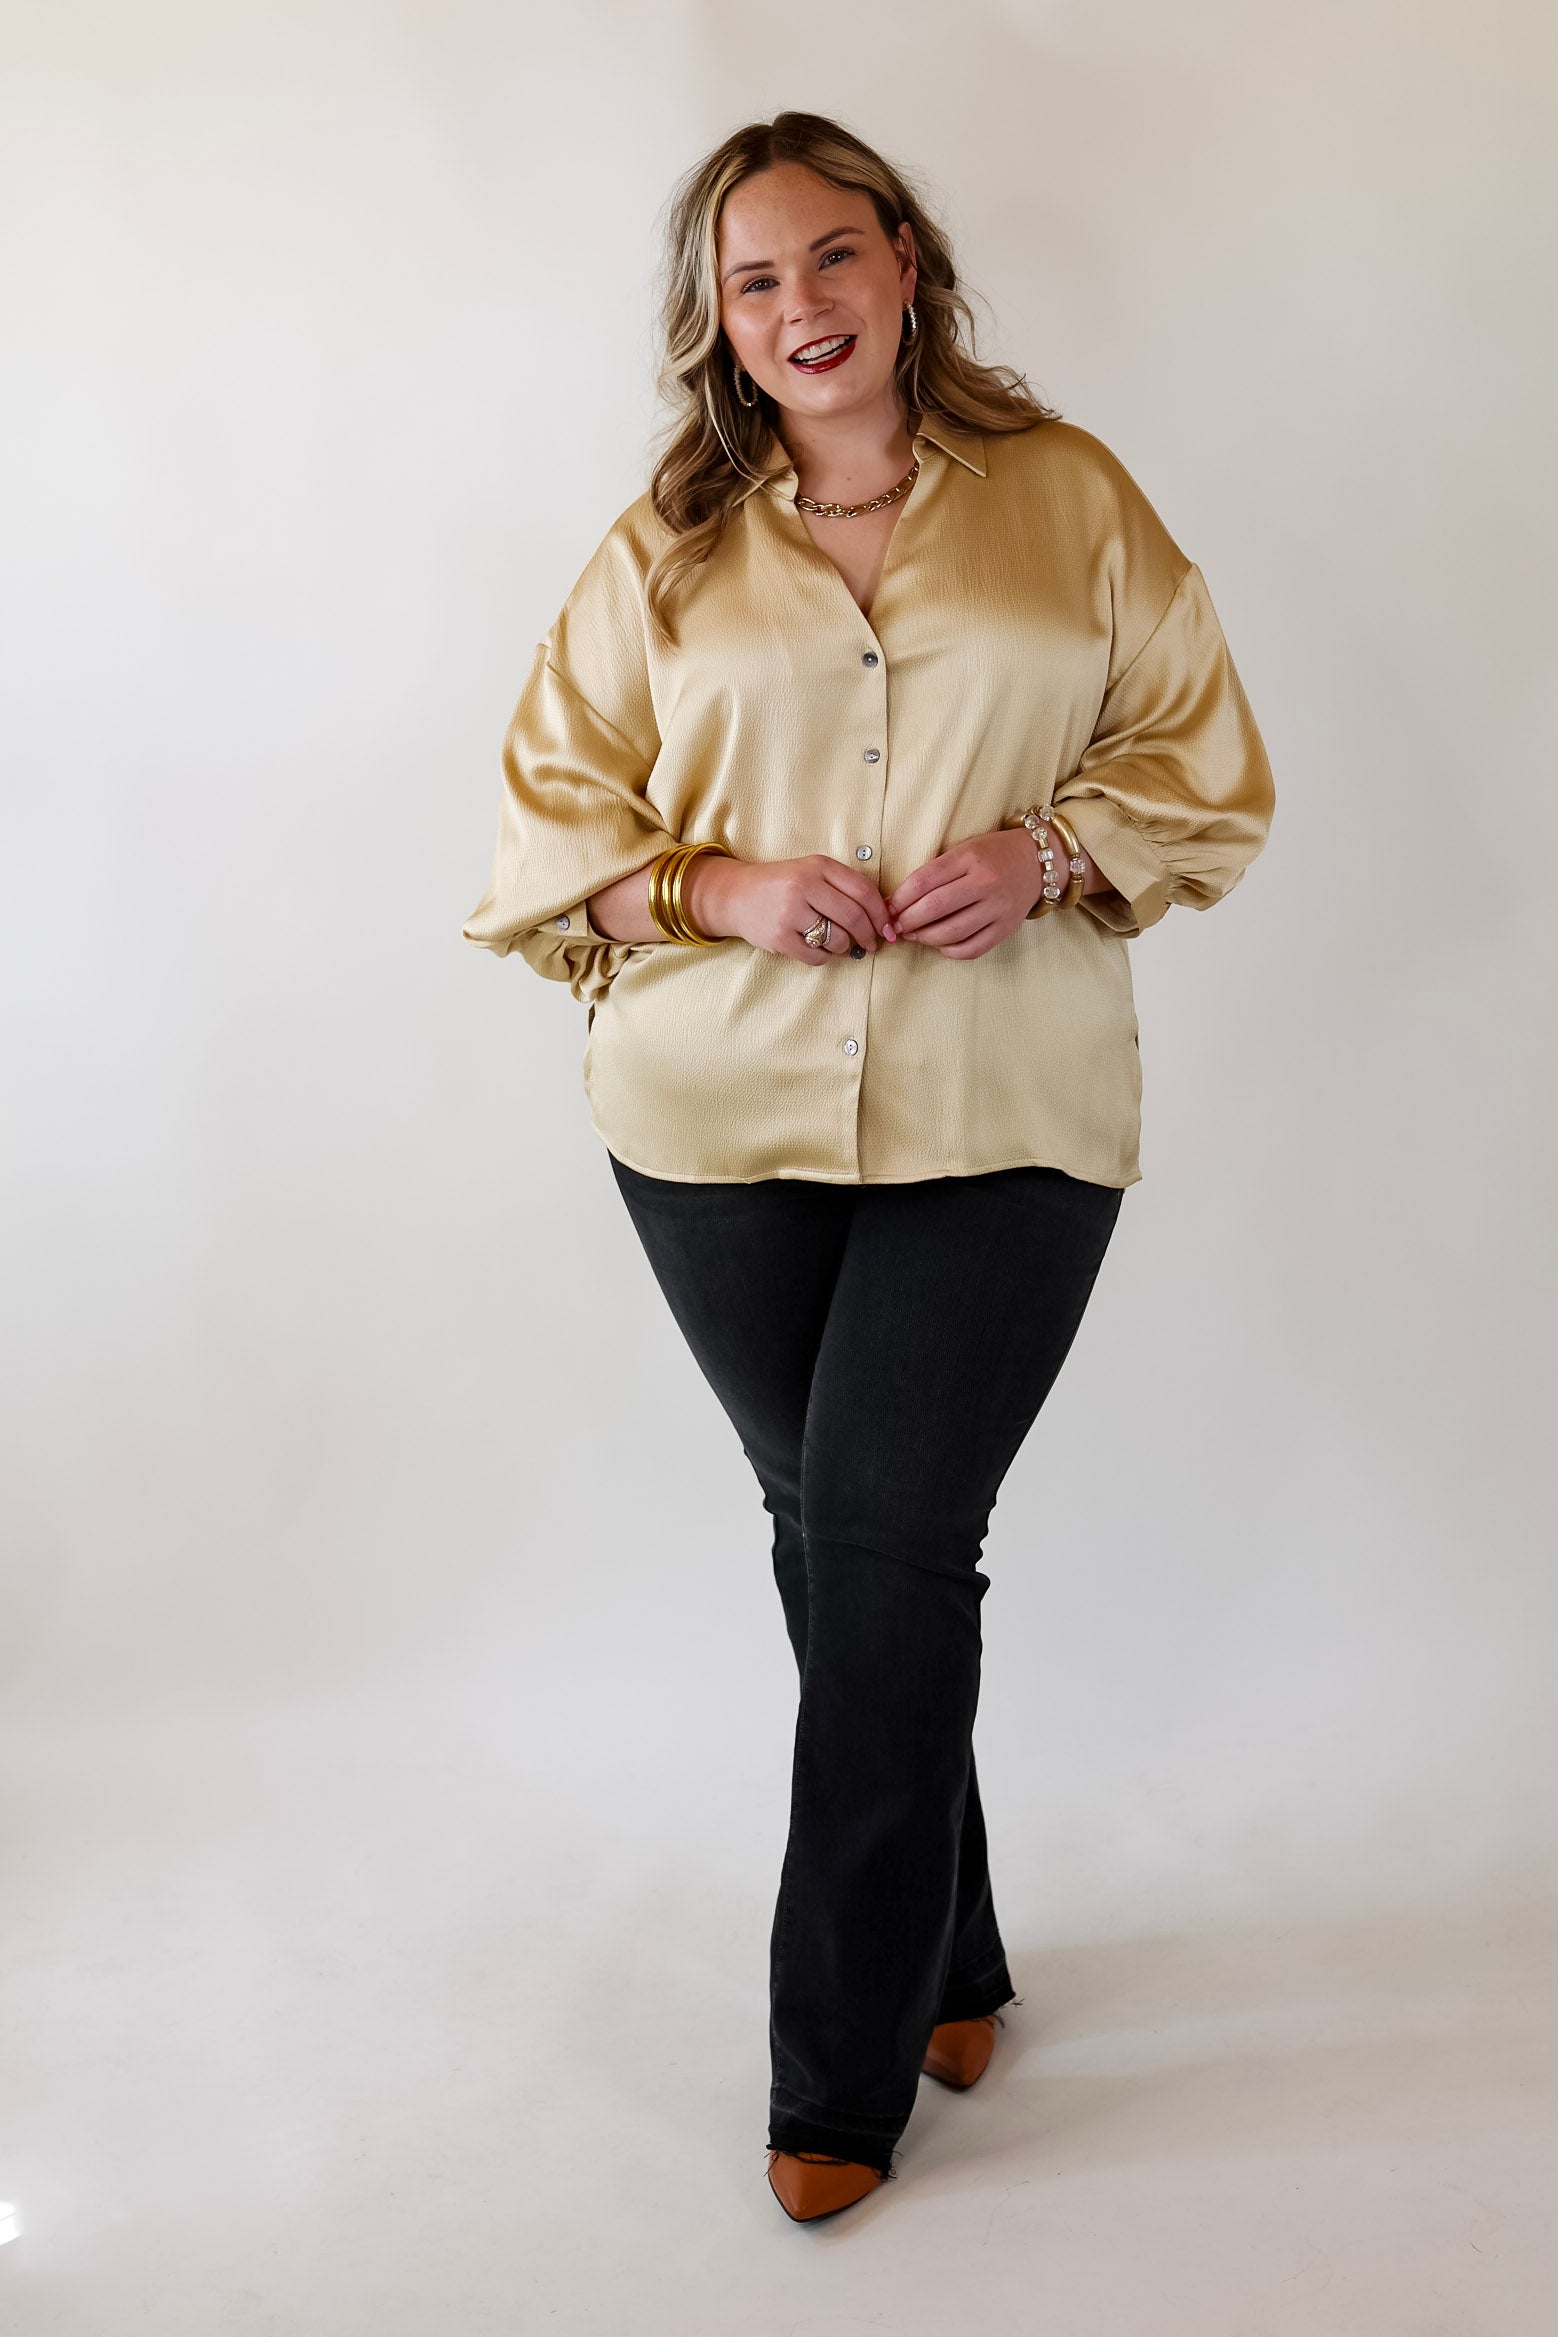 Sweet Notion Button Up 3/4 Balloon Sleeve Top in Light Yellow - Giddy Up Glamour Boutique